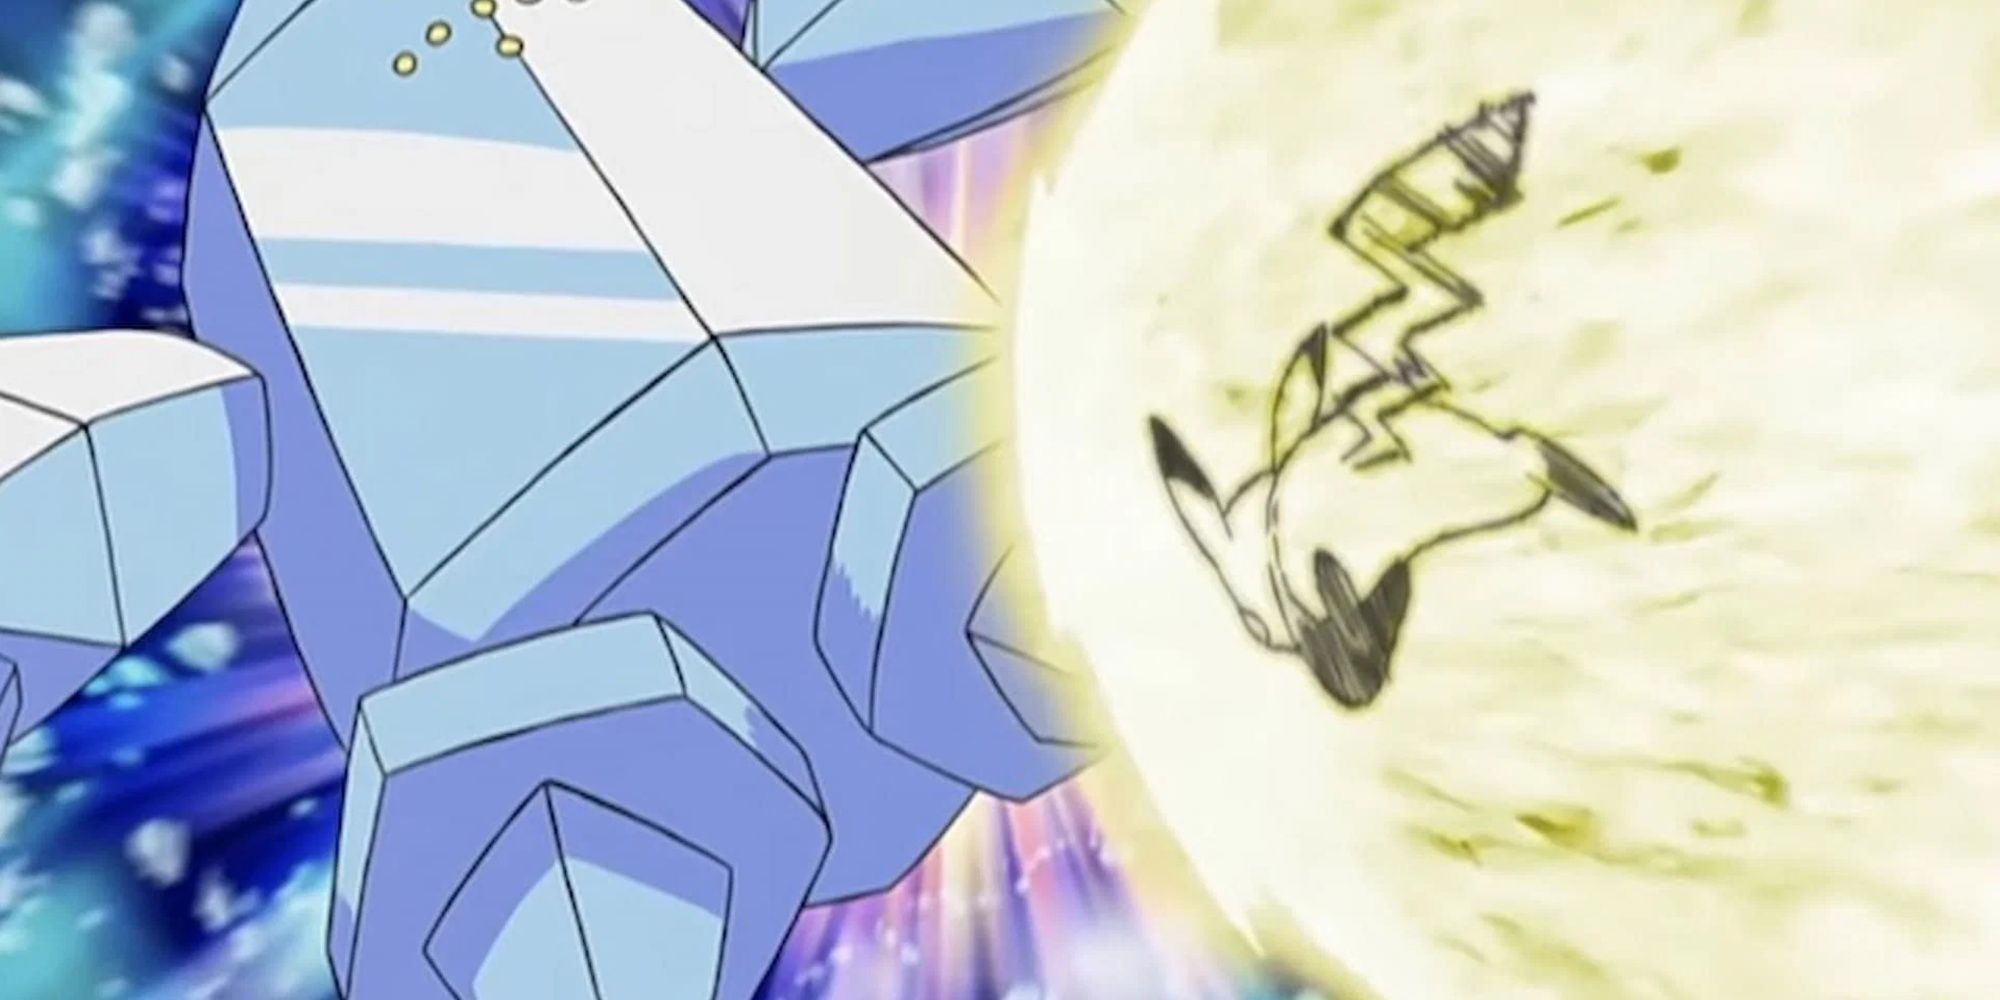 Oikachu Hitting Regice While Surrounded By A Electric Aura